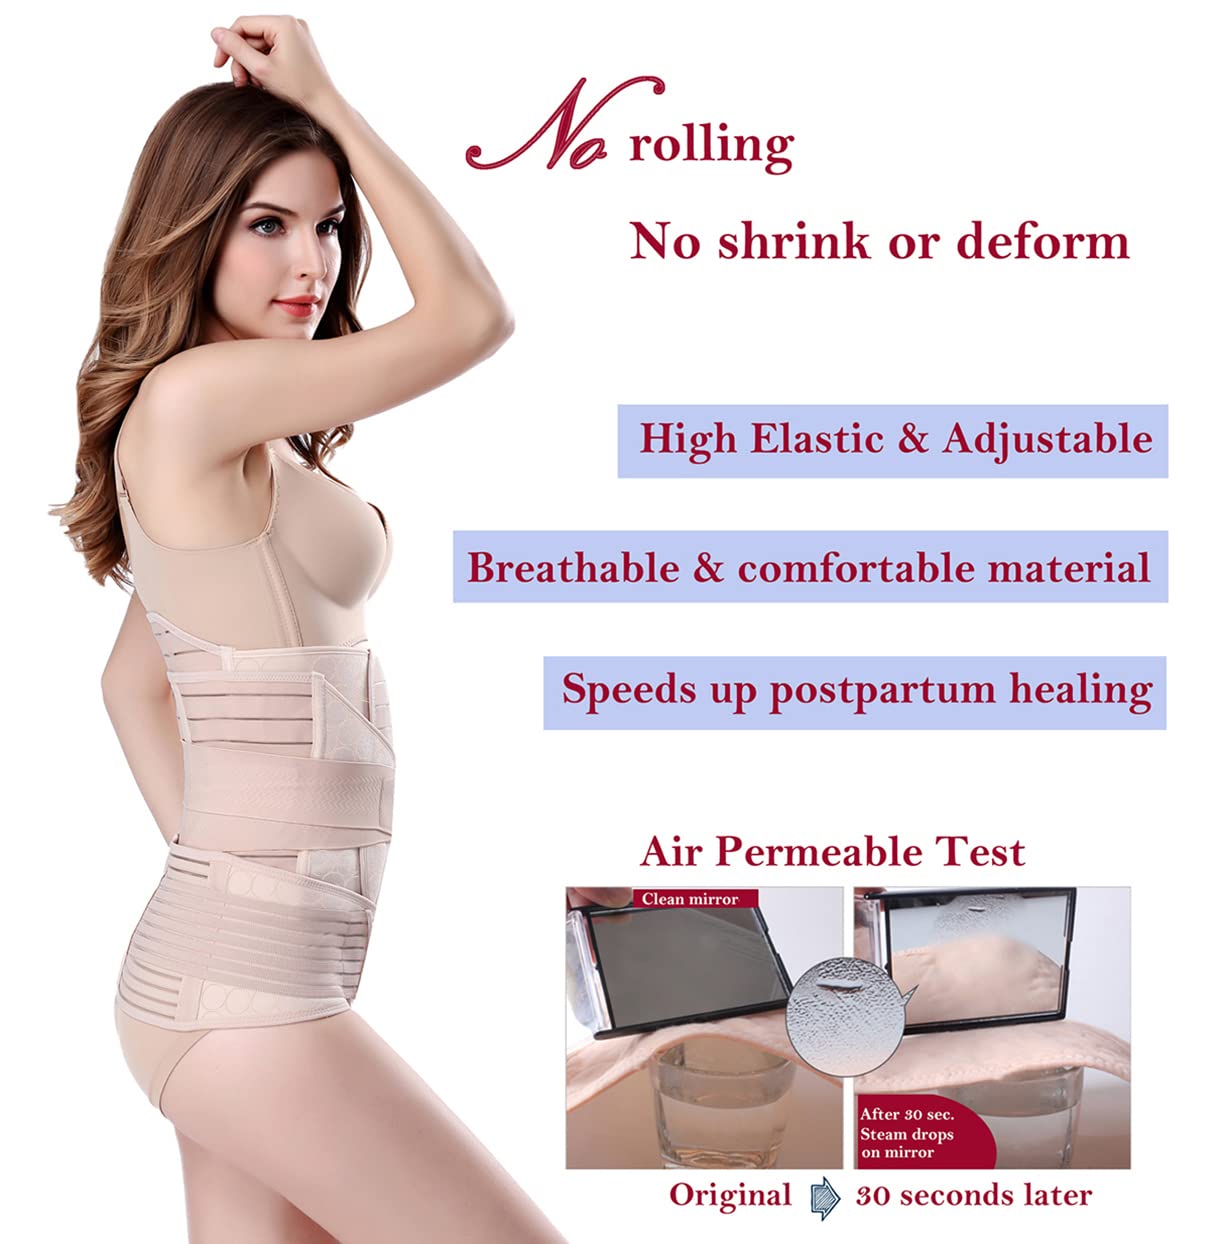 ChongErfei 3 in 1 Postpartum Support - Recovery Belly/waist/pelvis Belt Shapewear Slimming Girdle, Beige, One Size For Posture Correction